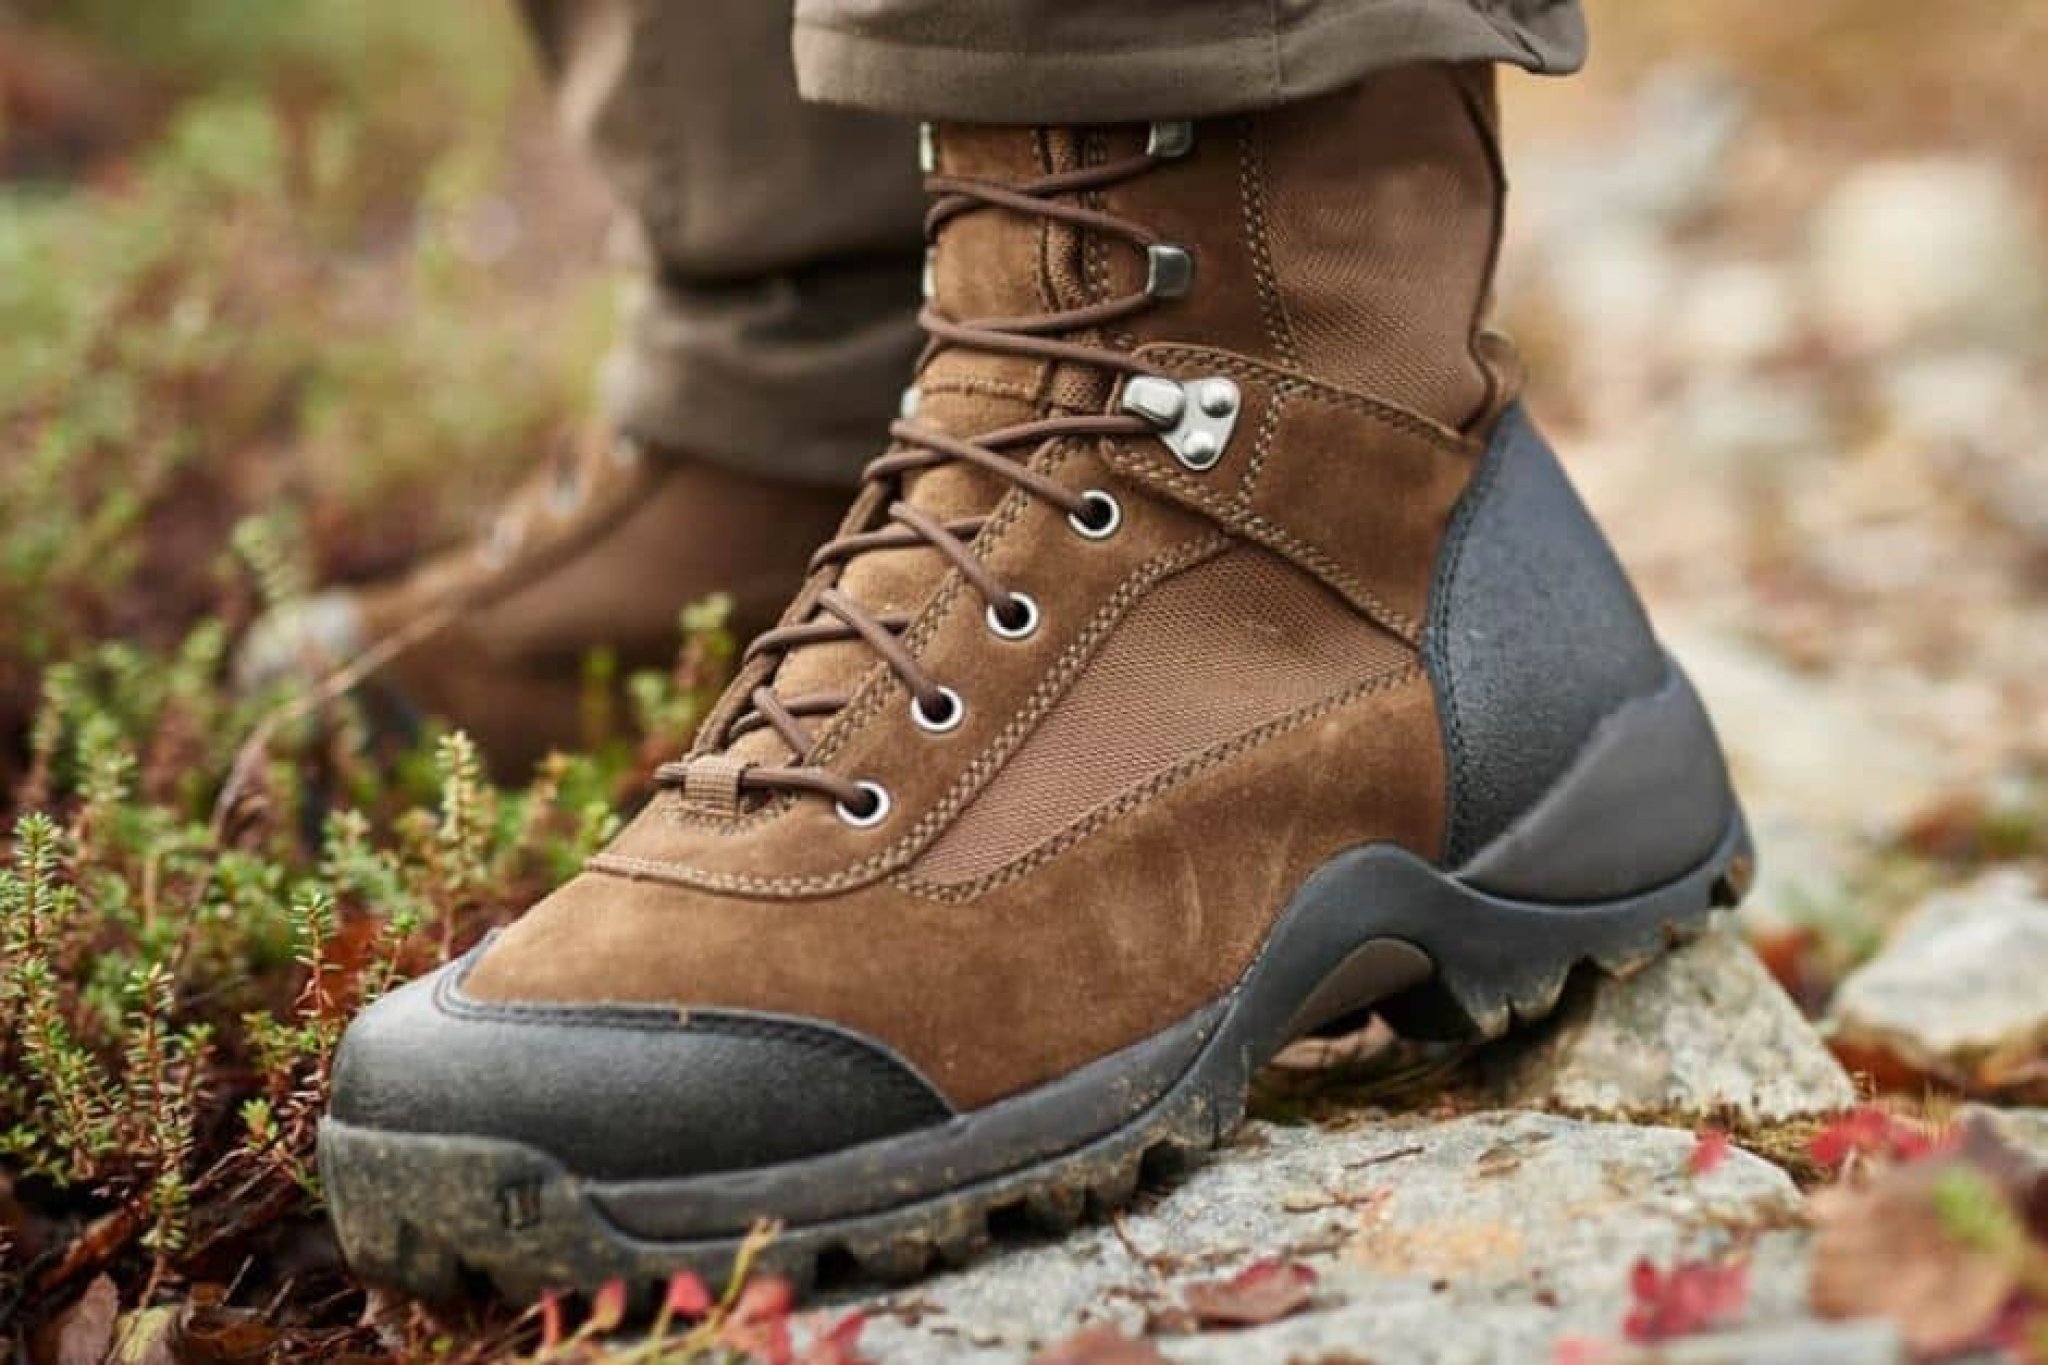 The 10 Best Snake Proof Boots in 2022: Guide